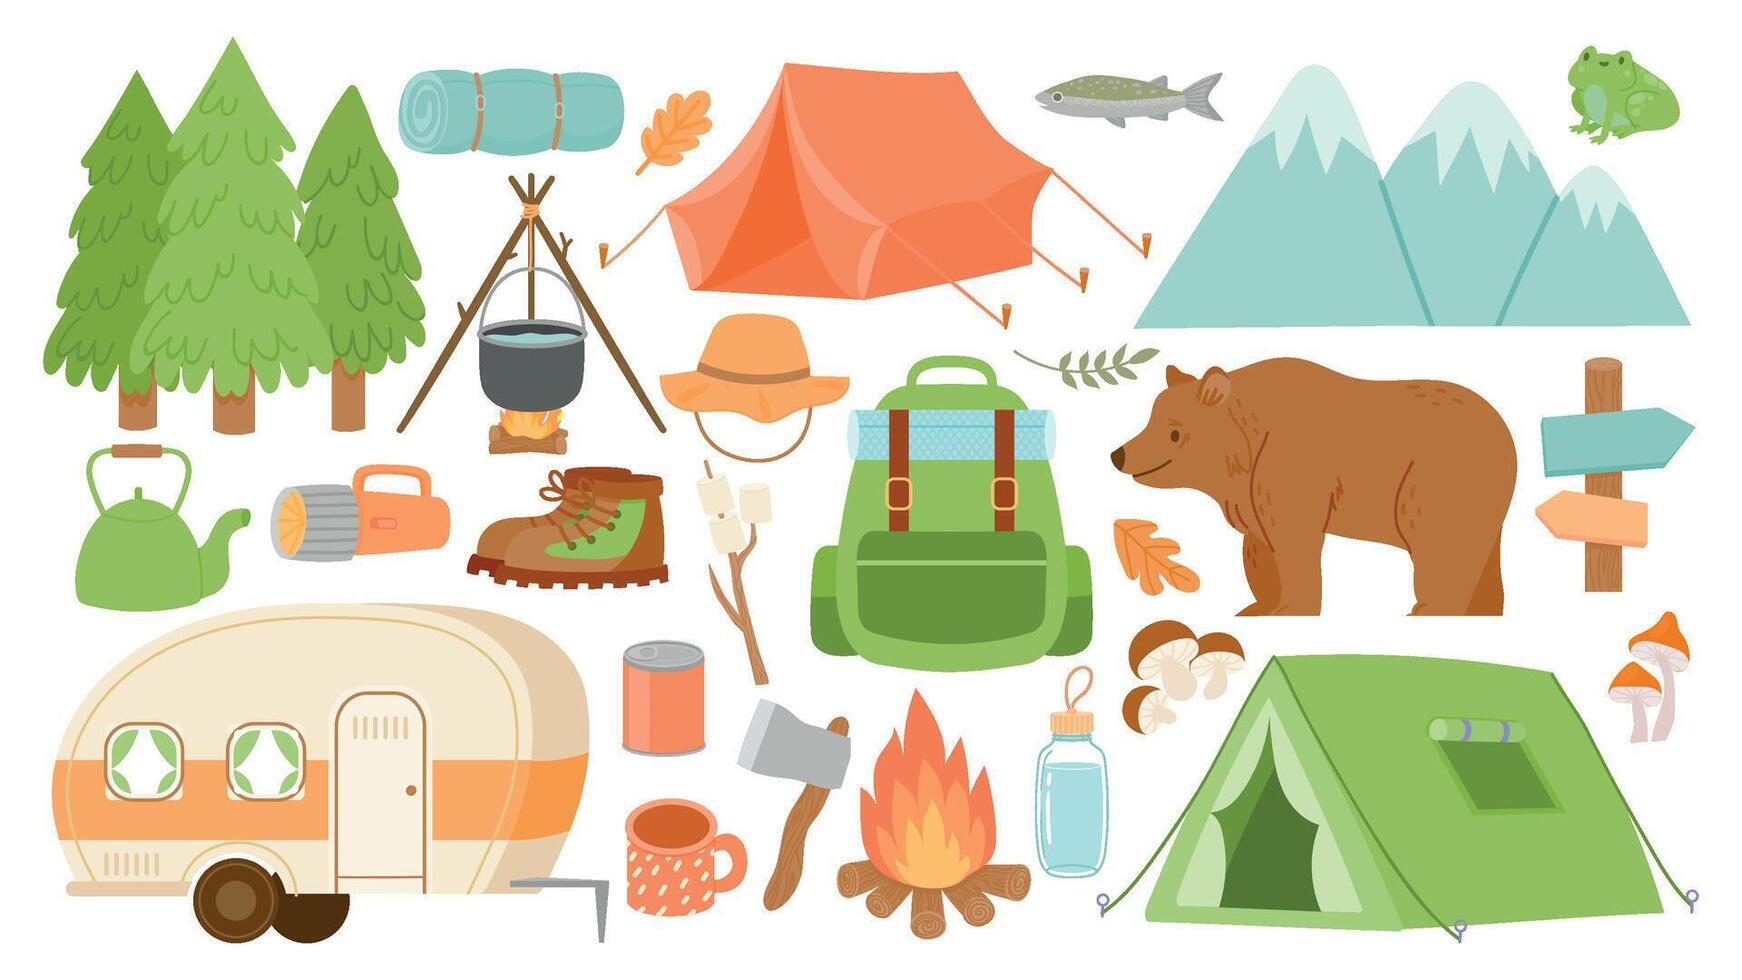 Cartoon camping and hiking equipment, tent and forest nature. Camp fire, bag, road home, lantern and mat. Survival hike adventure vector set